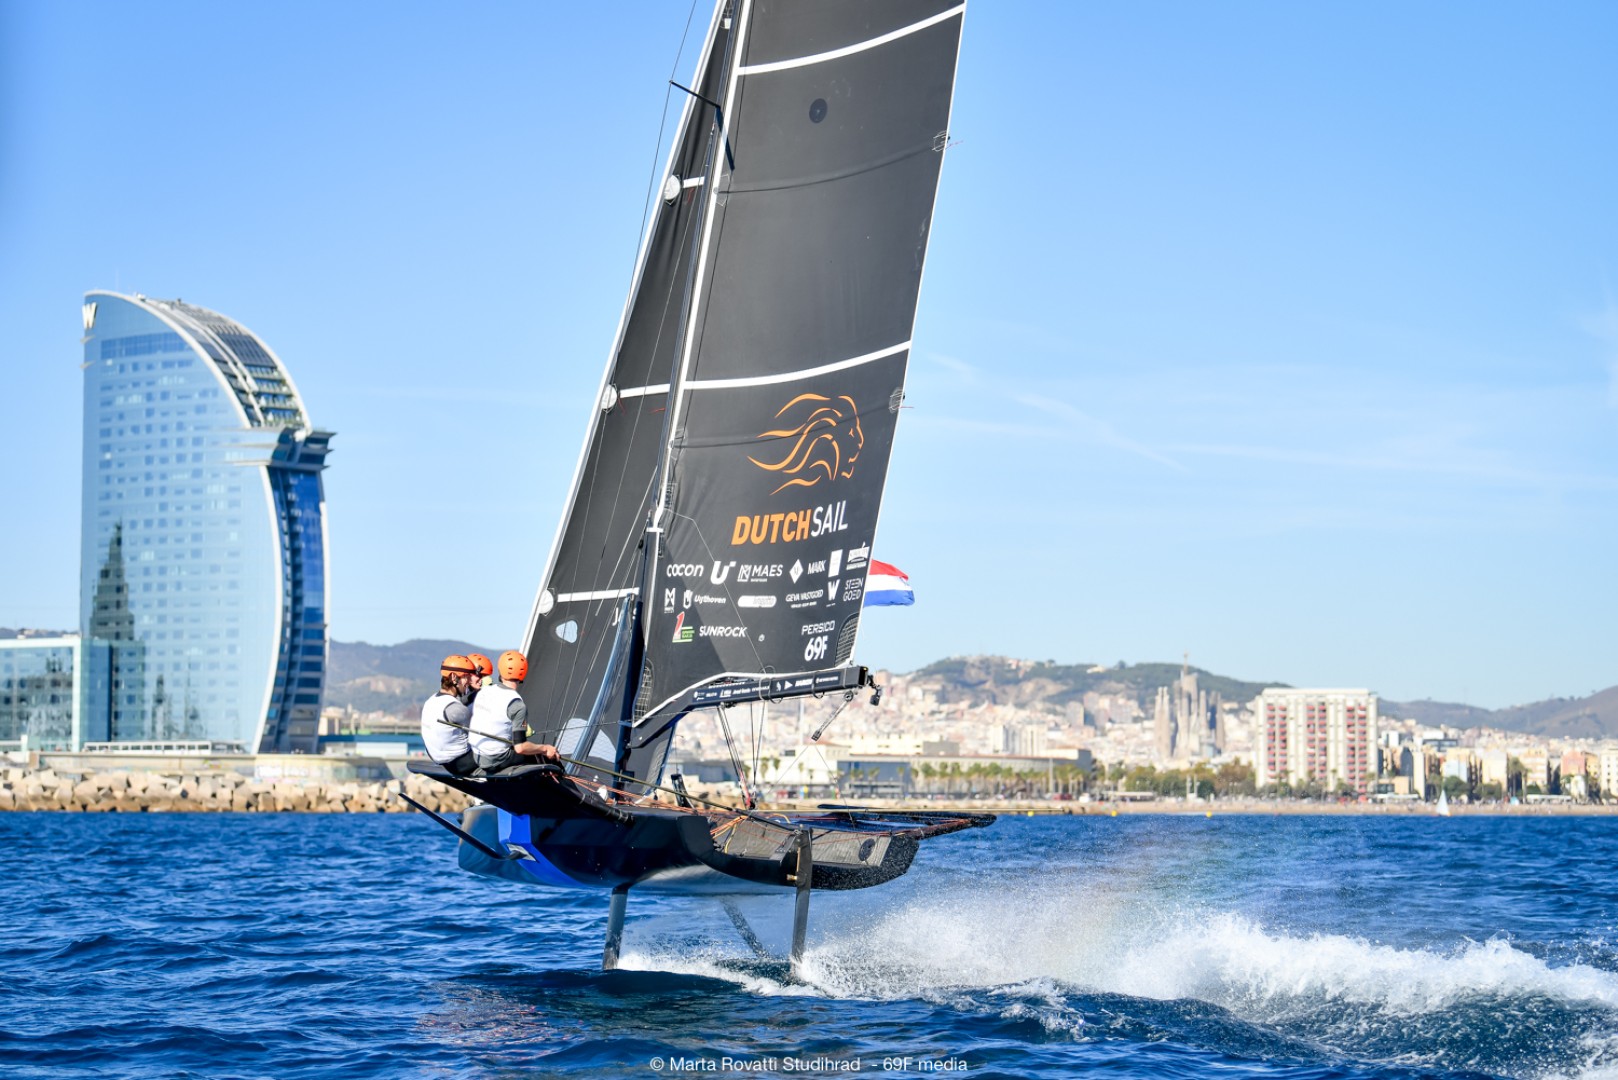 69F Youth Foiling Gold Cup, Act 3 opens the two-week season finale in Barcelona, Spain